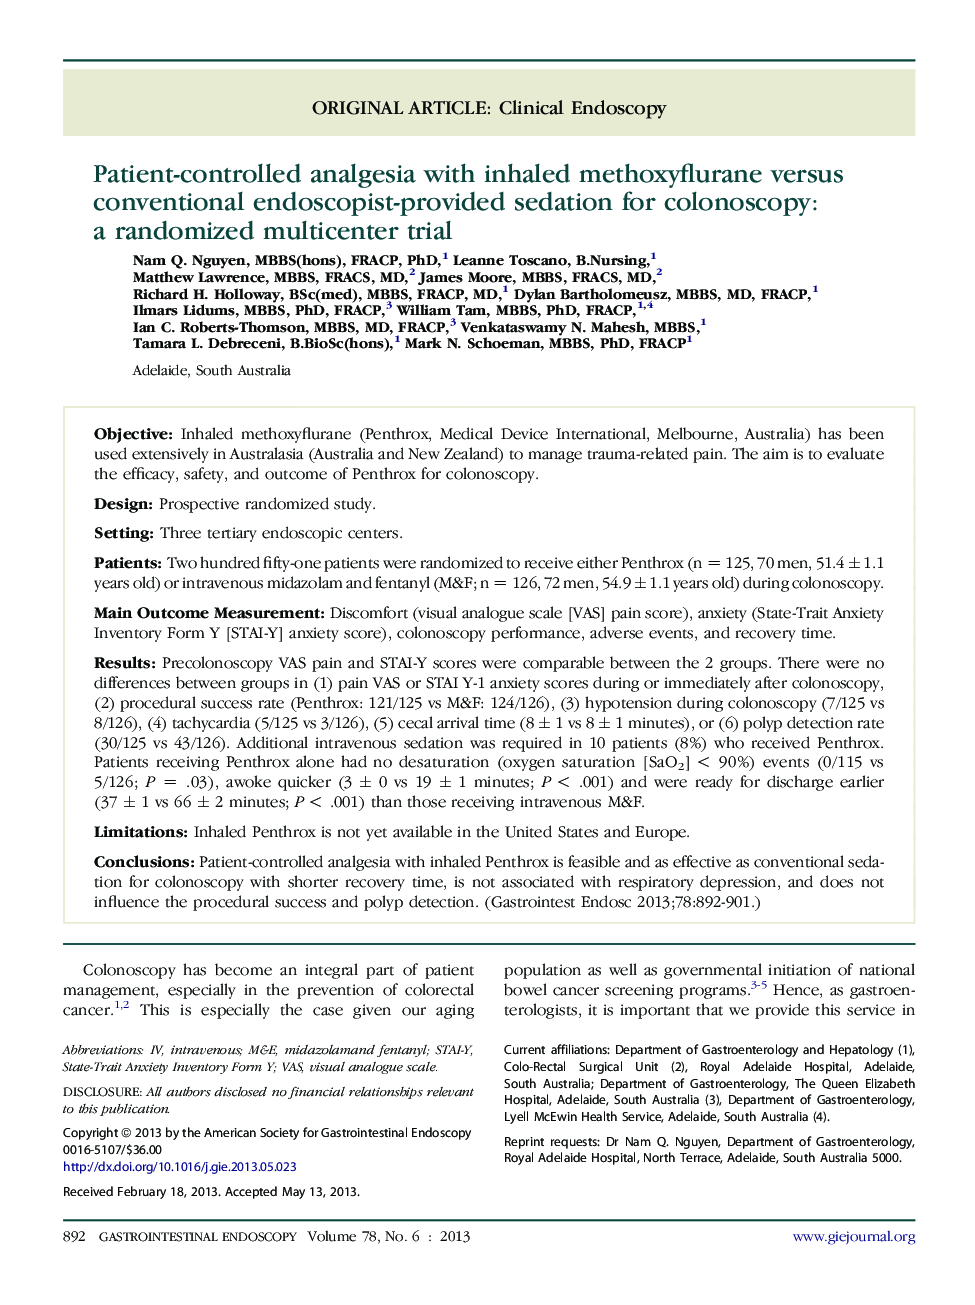 Patient-controlled analgesia with inhaled methoxyflurane versus conventional endoscopist-provided sedation for colonoscopy: a randomized multicenter trial 